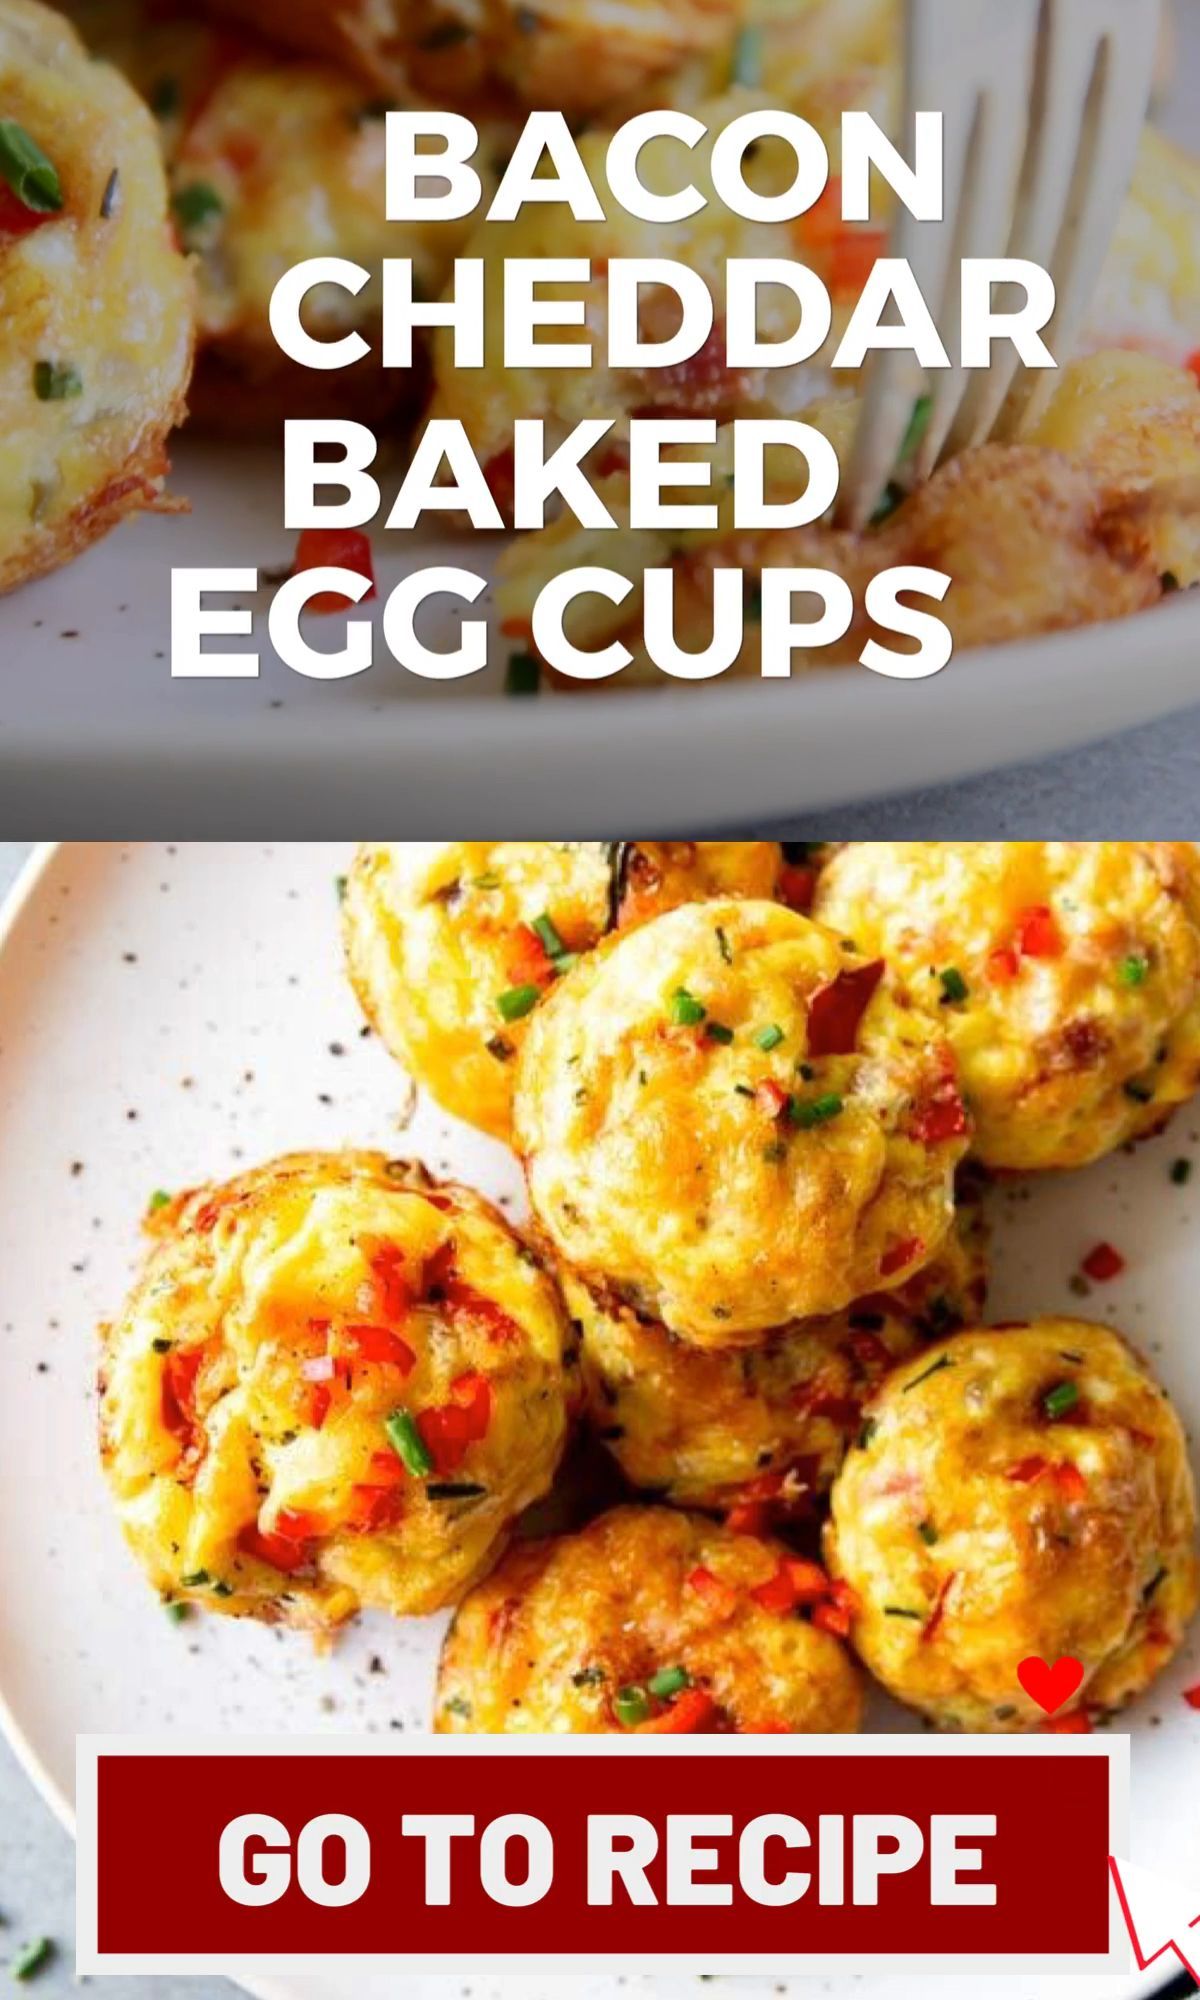 Bacon Cheddar Baked Egg Cups (Healthy Meal Prep!) -   17 meal prep recipes breakfast ideas